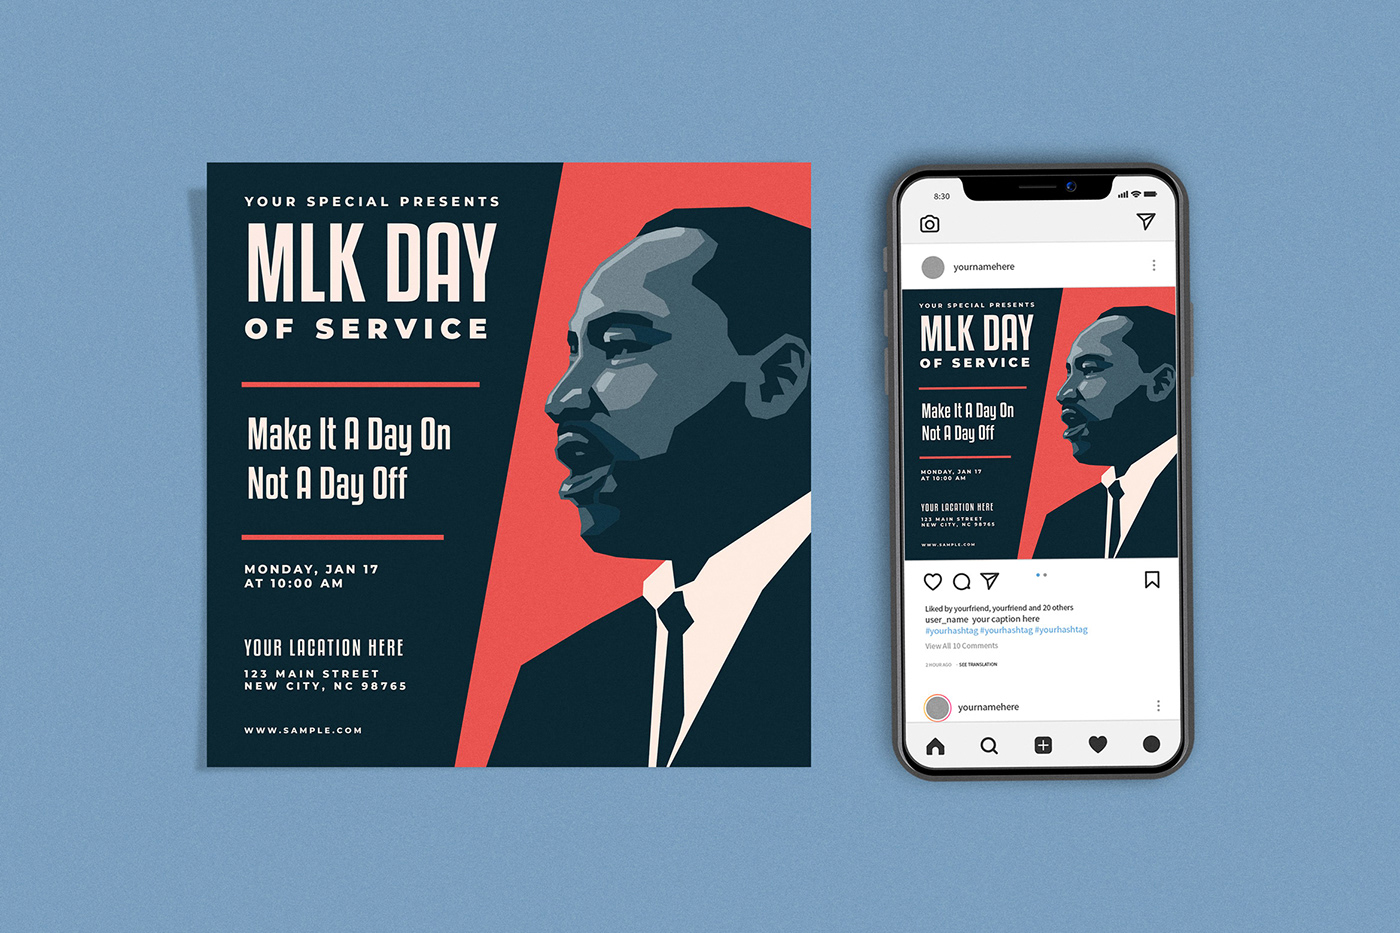 black history month king Martin Luther King martin luther king jr MLK MLK day MLK JR peace posters